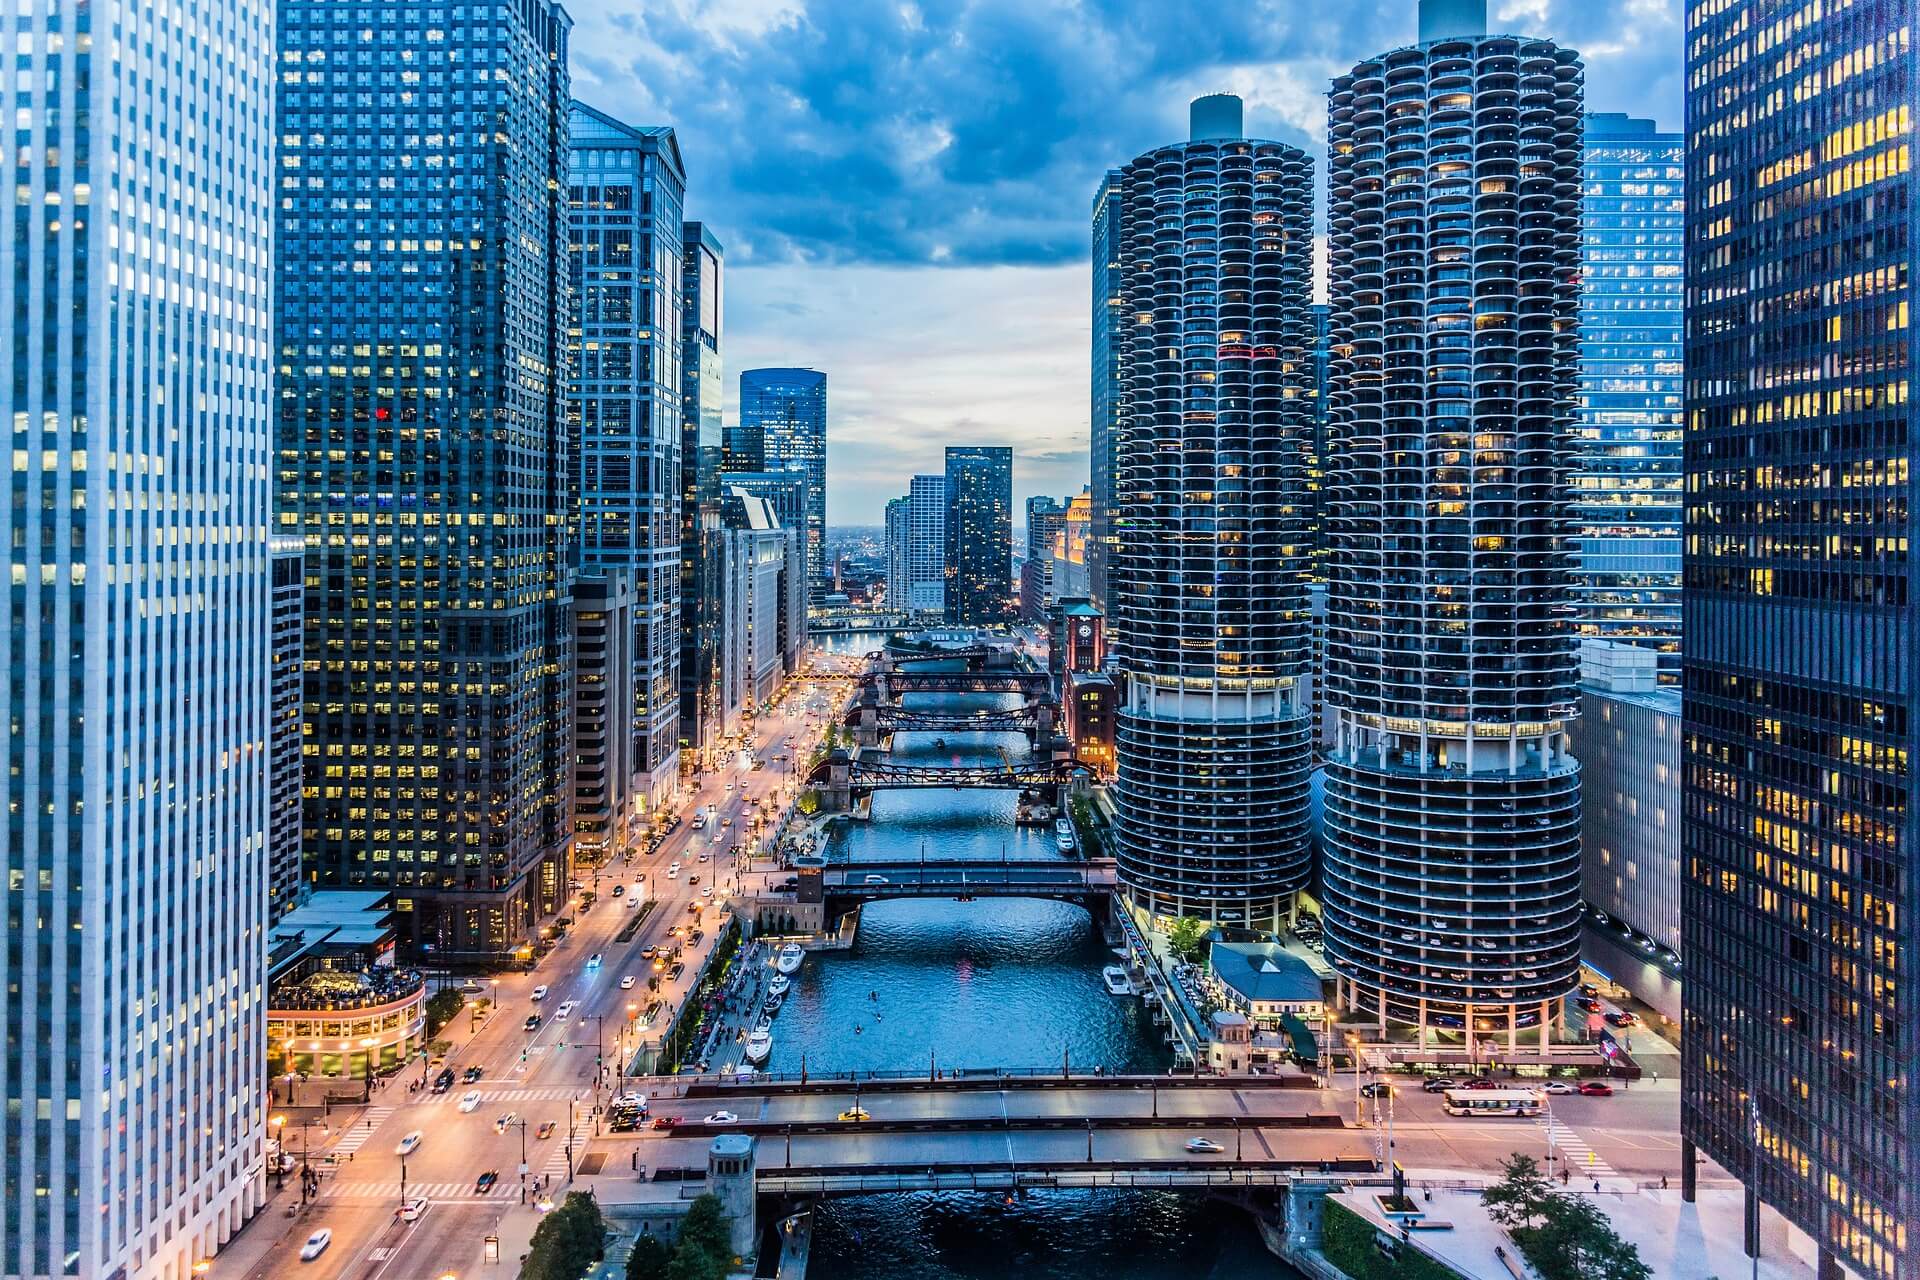 Marina City Towers in Chicago, Illinois